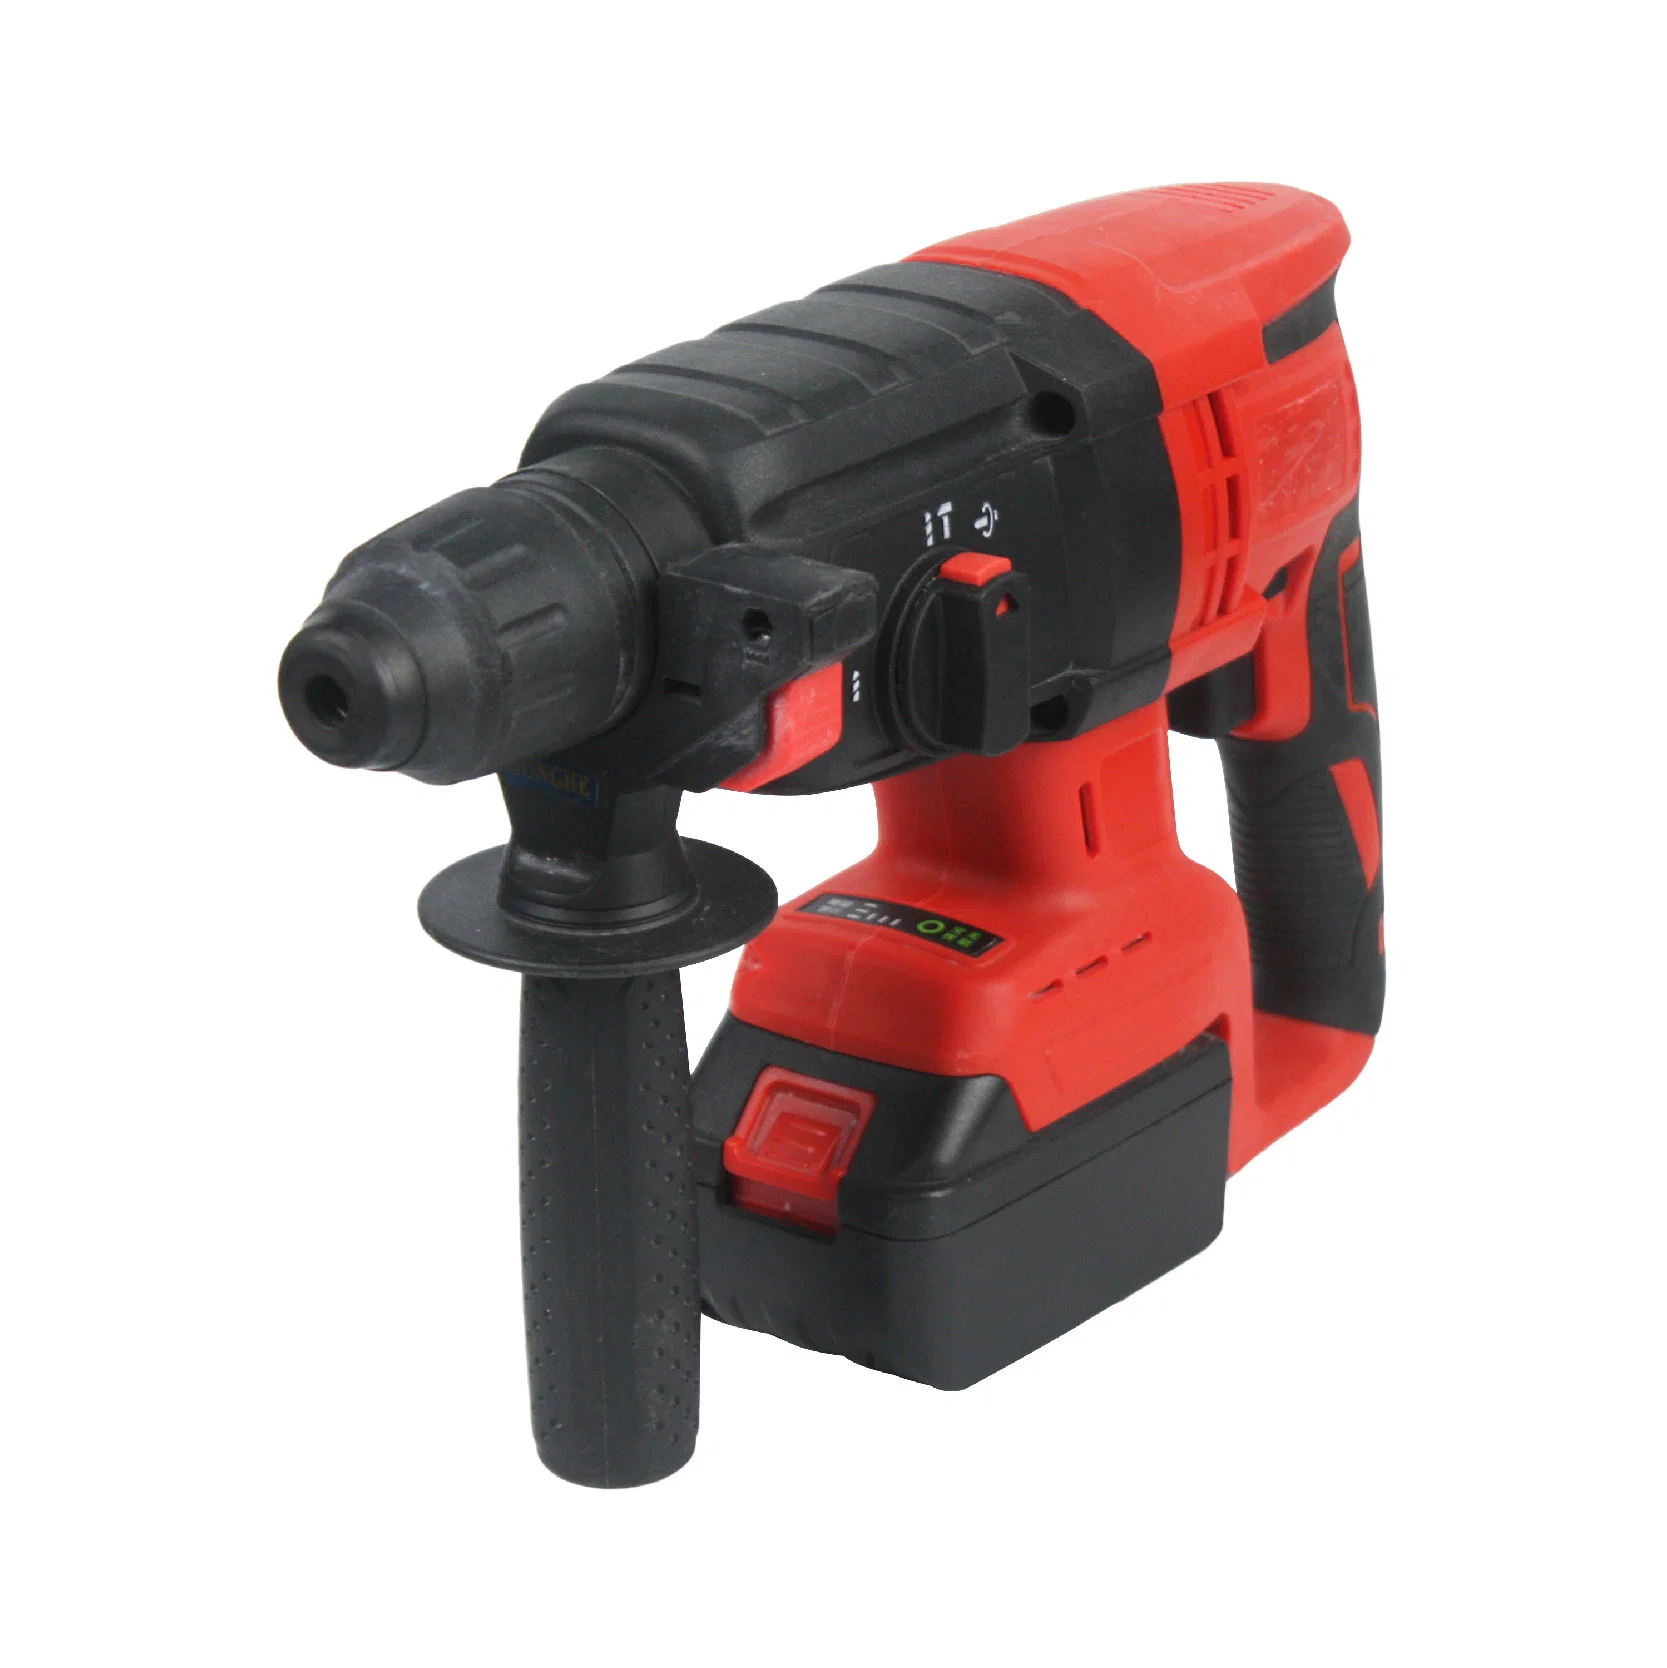 18V Rechargeable Lithium Battery Brushless Drills Electric Power Tools Impact Cordless Power Drill